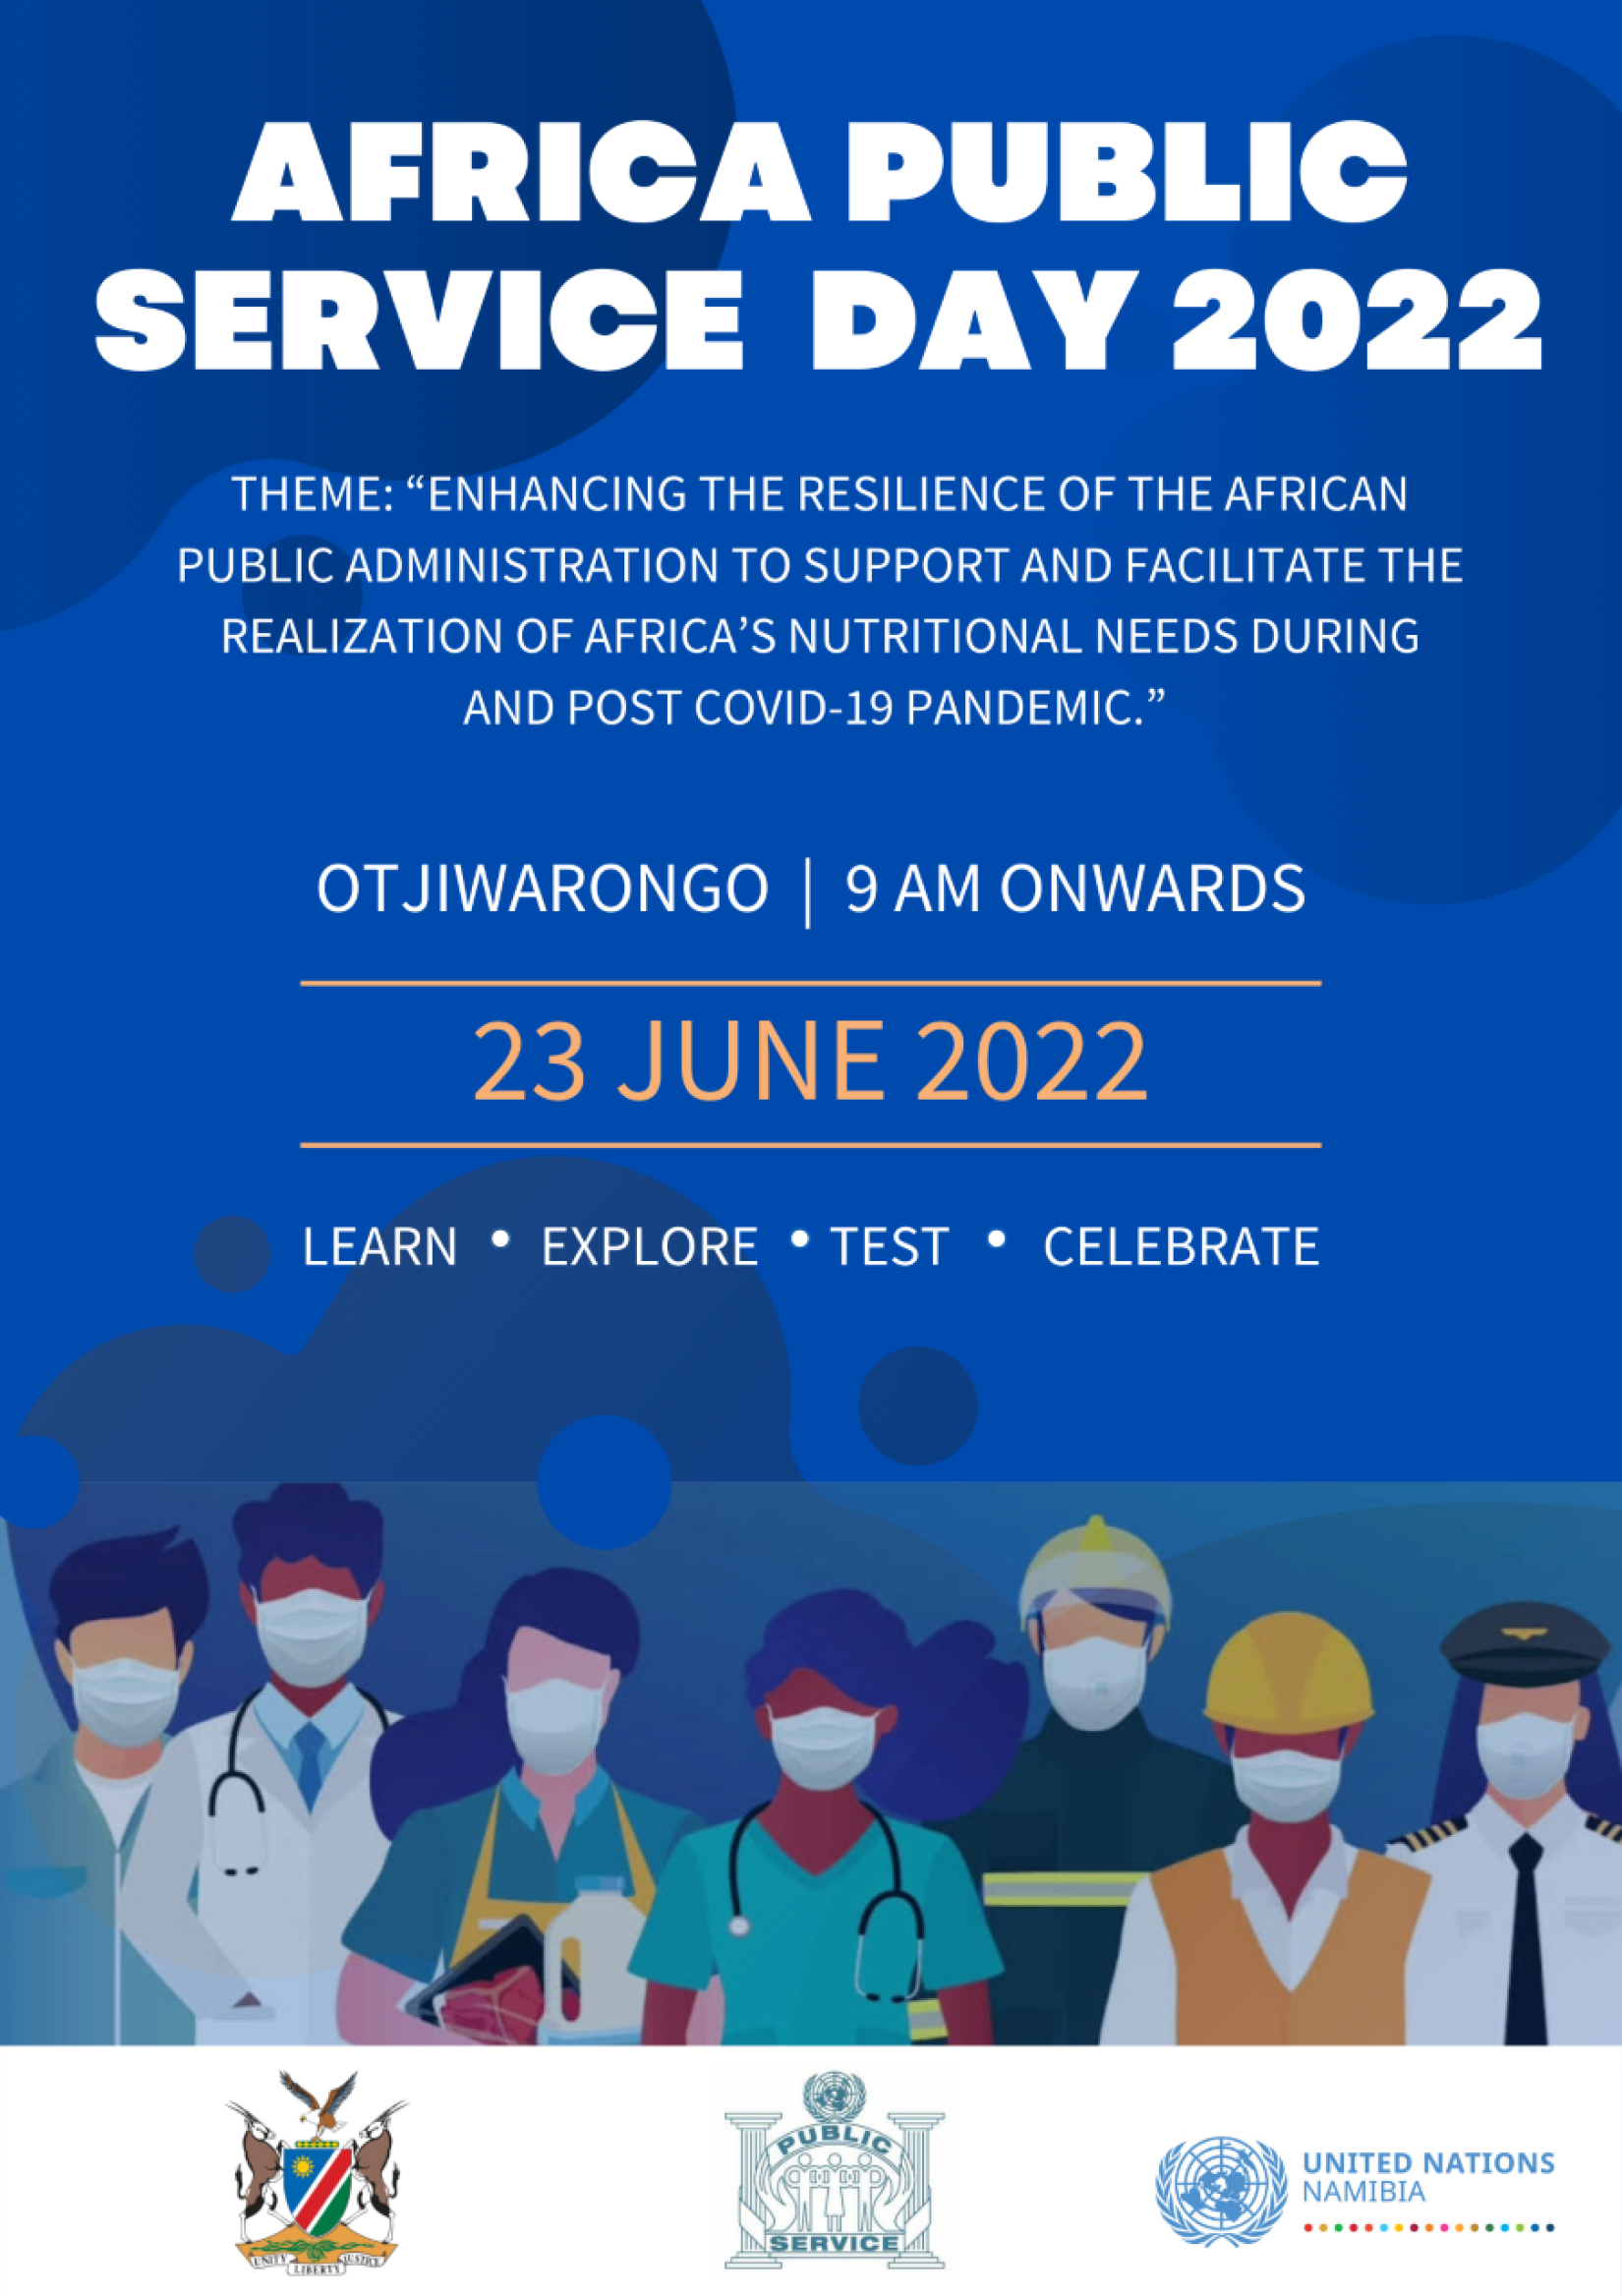 Africa Public Service Day 2022